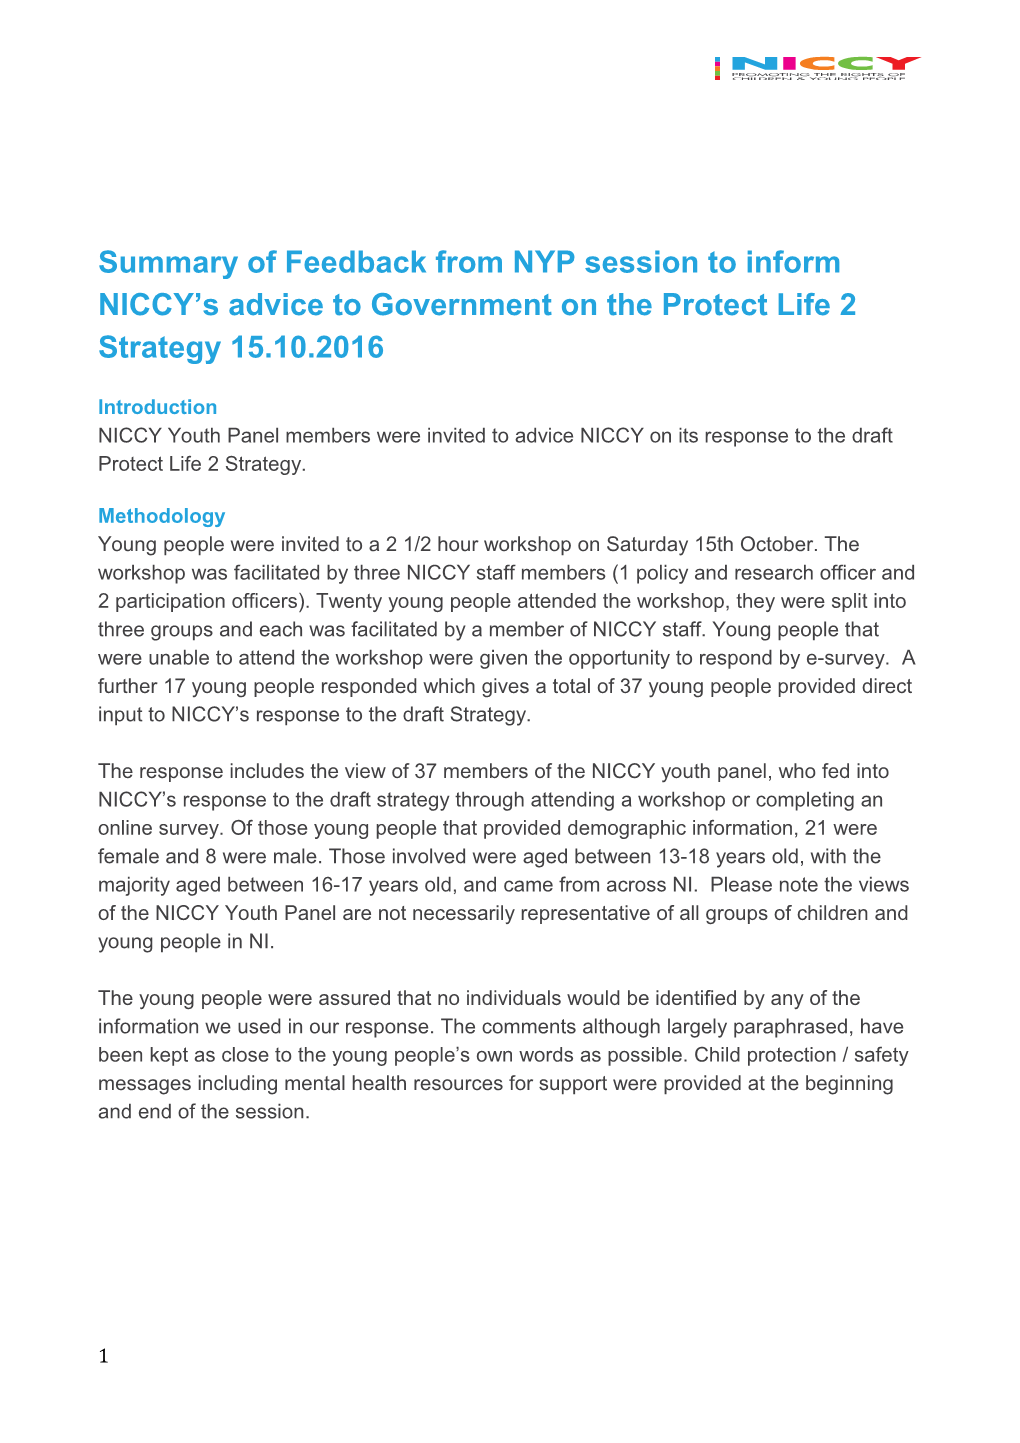 Summary of Feedback from NYP Session to Inform NICCY S Advice to Government on the Protect